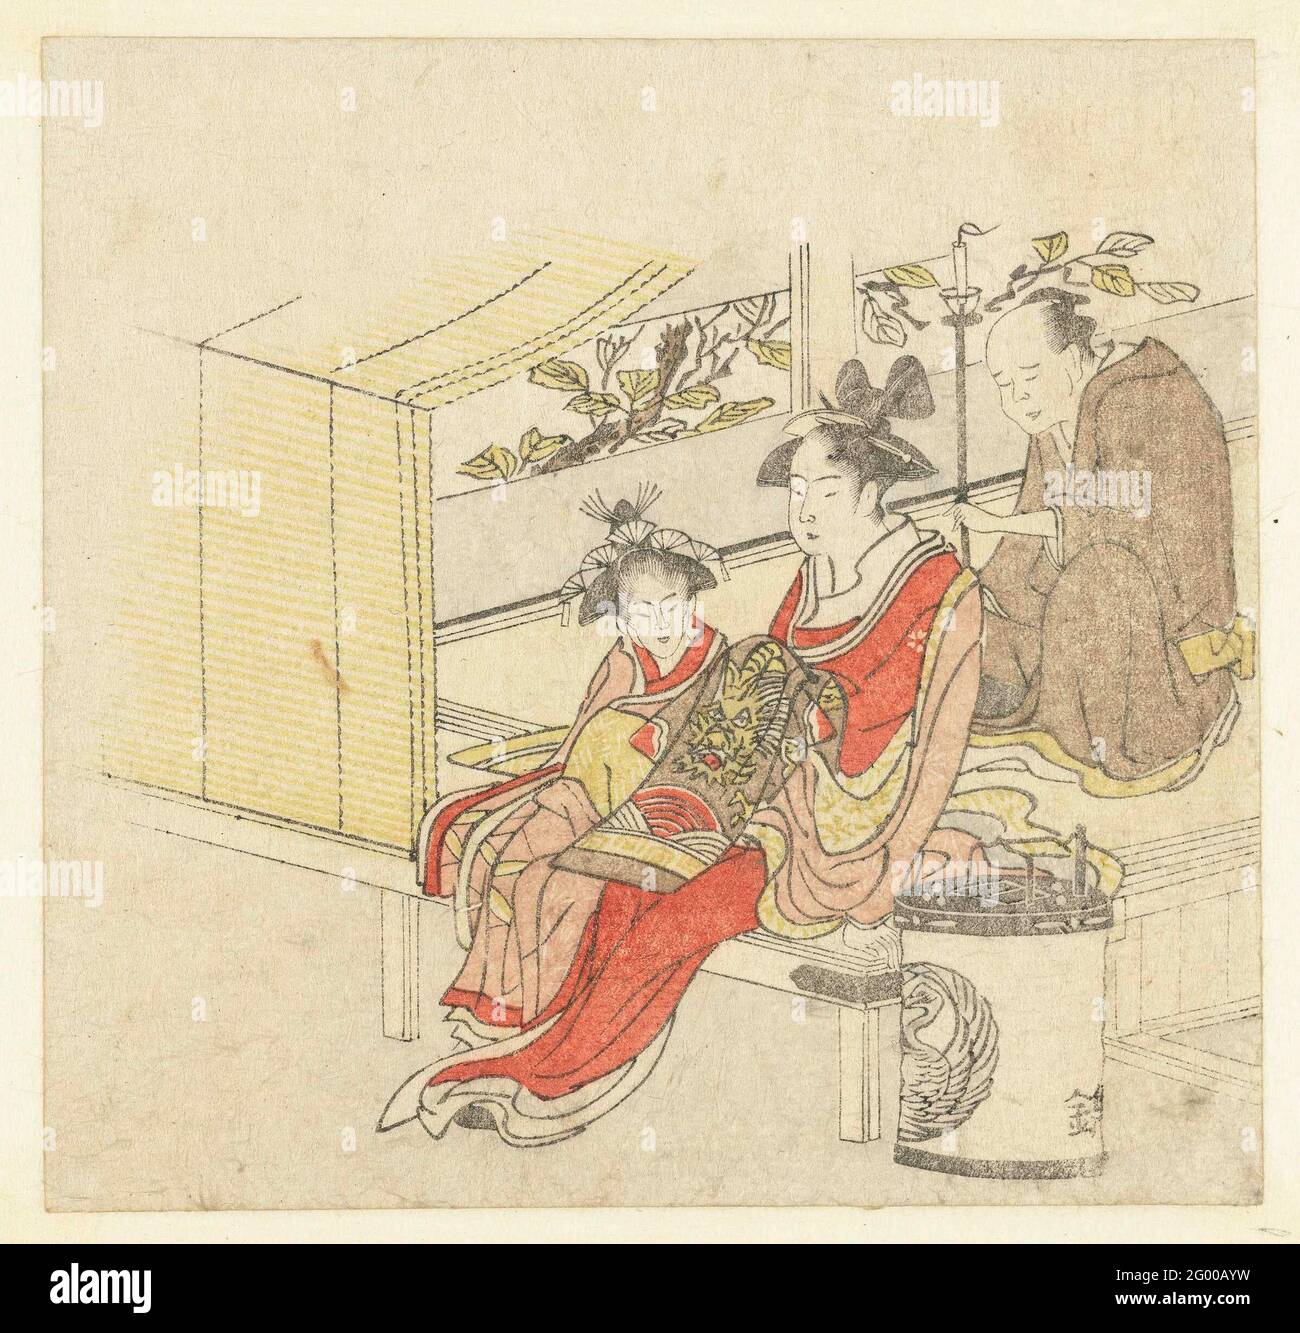 Courtisan and servants. A Courtisane with her maid (Kamuro) sitting on a bench at a tea house, a servant behind them. The Grote Crane probably refers to the House of the Crane (Tsuruya) in the Yoshiwara District. The dragon stands for the dragon year 1796. No poems, probably cut off. Stock Photo